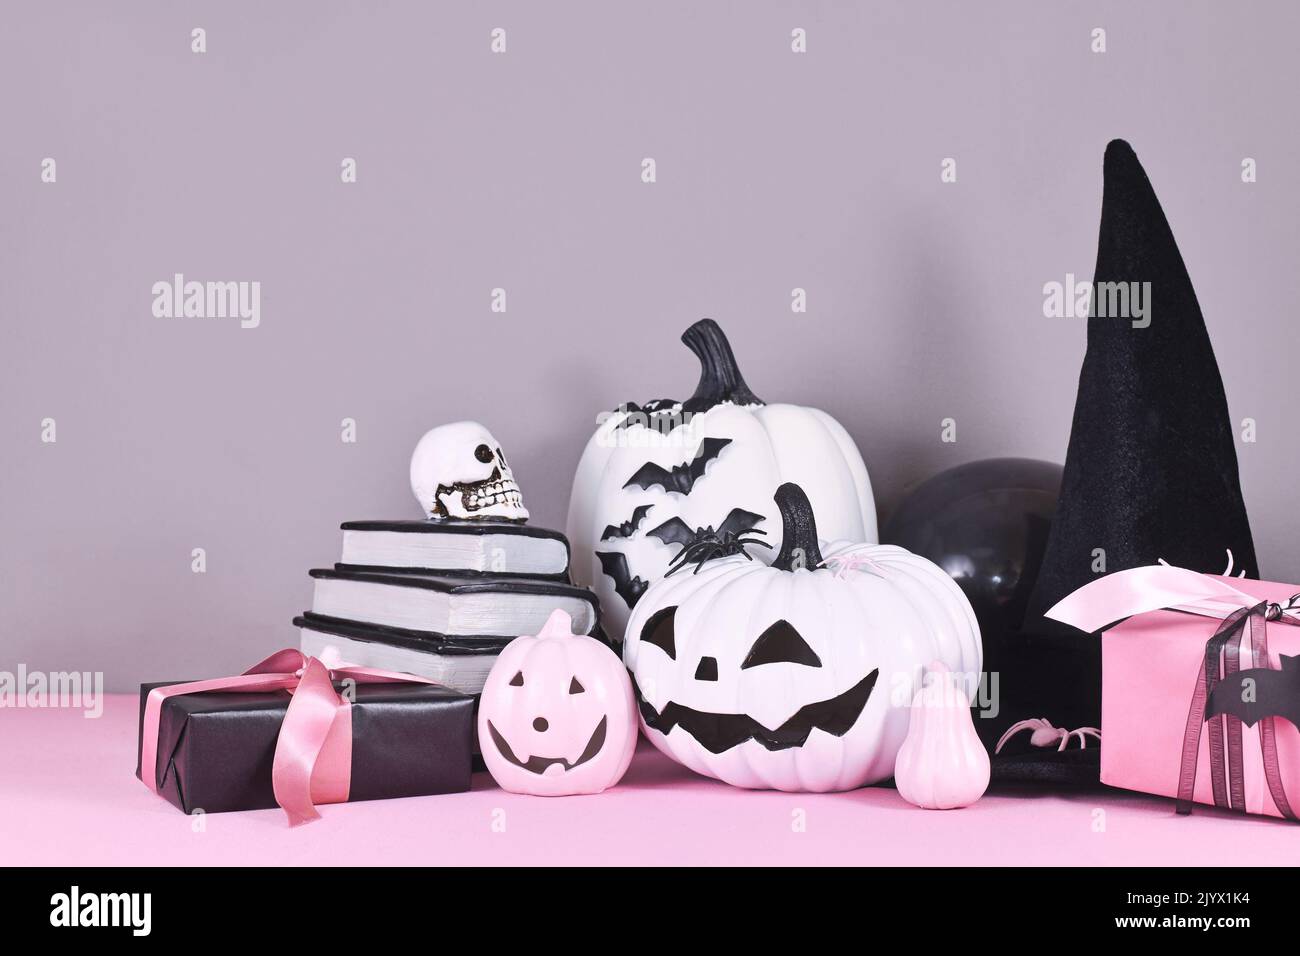 Pink and white Halloween decor with black and white pumpkins, , witch hat and spell books on gray background Stock Photo